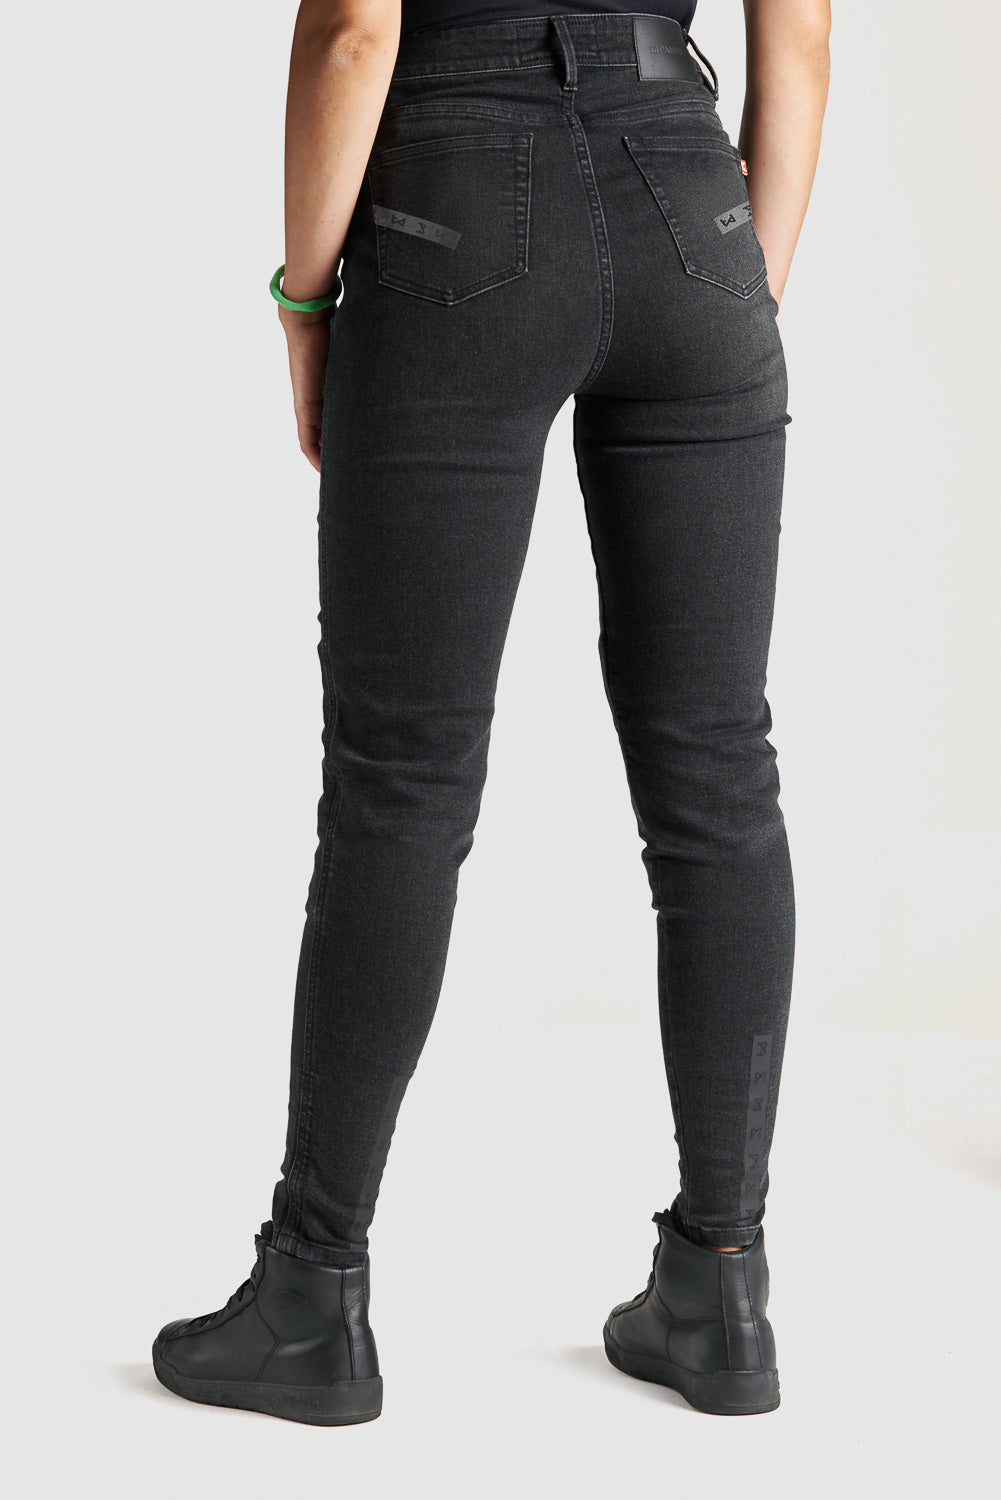 woman's legs  from the back wearing black high waist motorcycle jeans